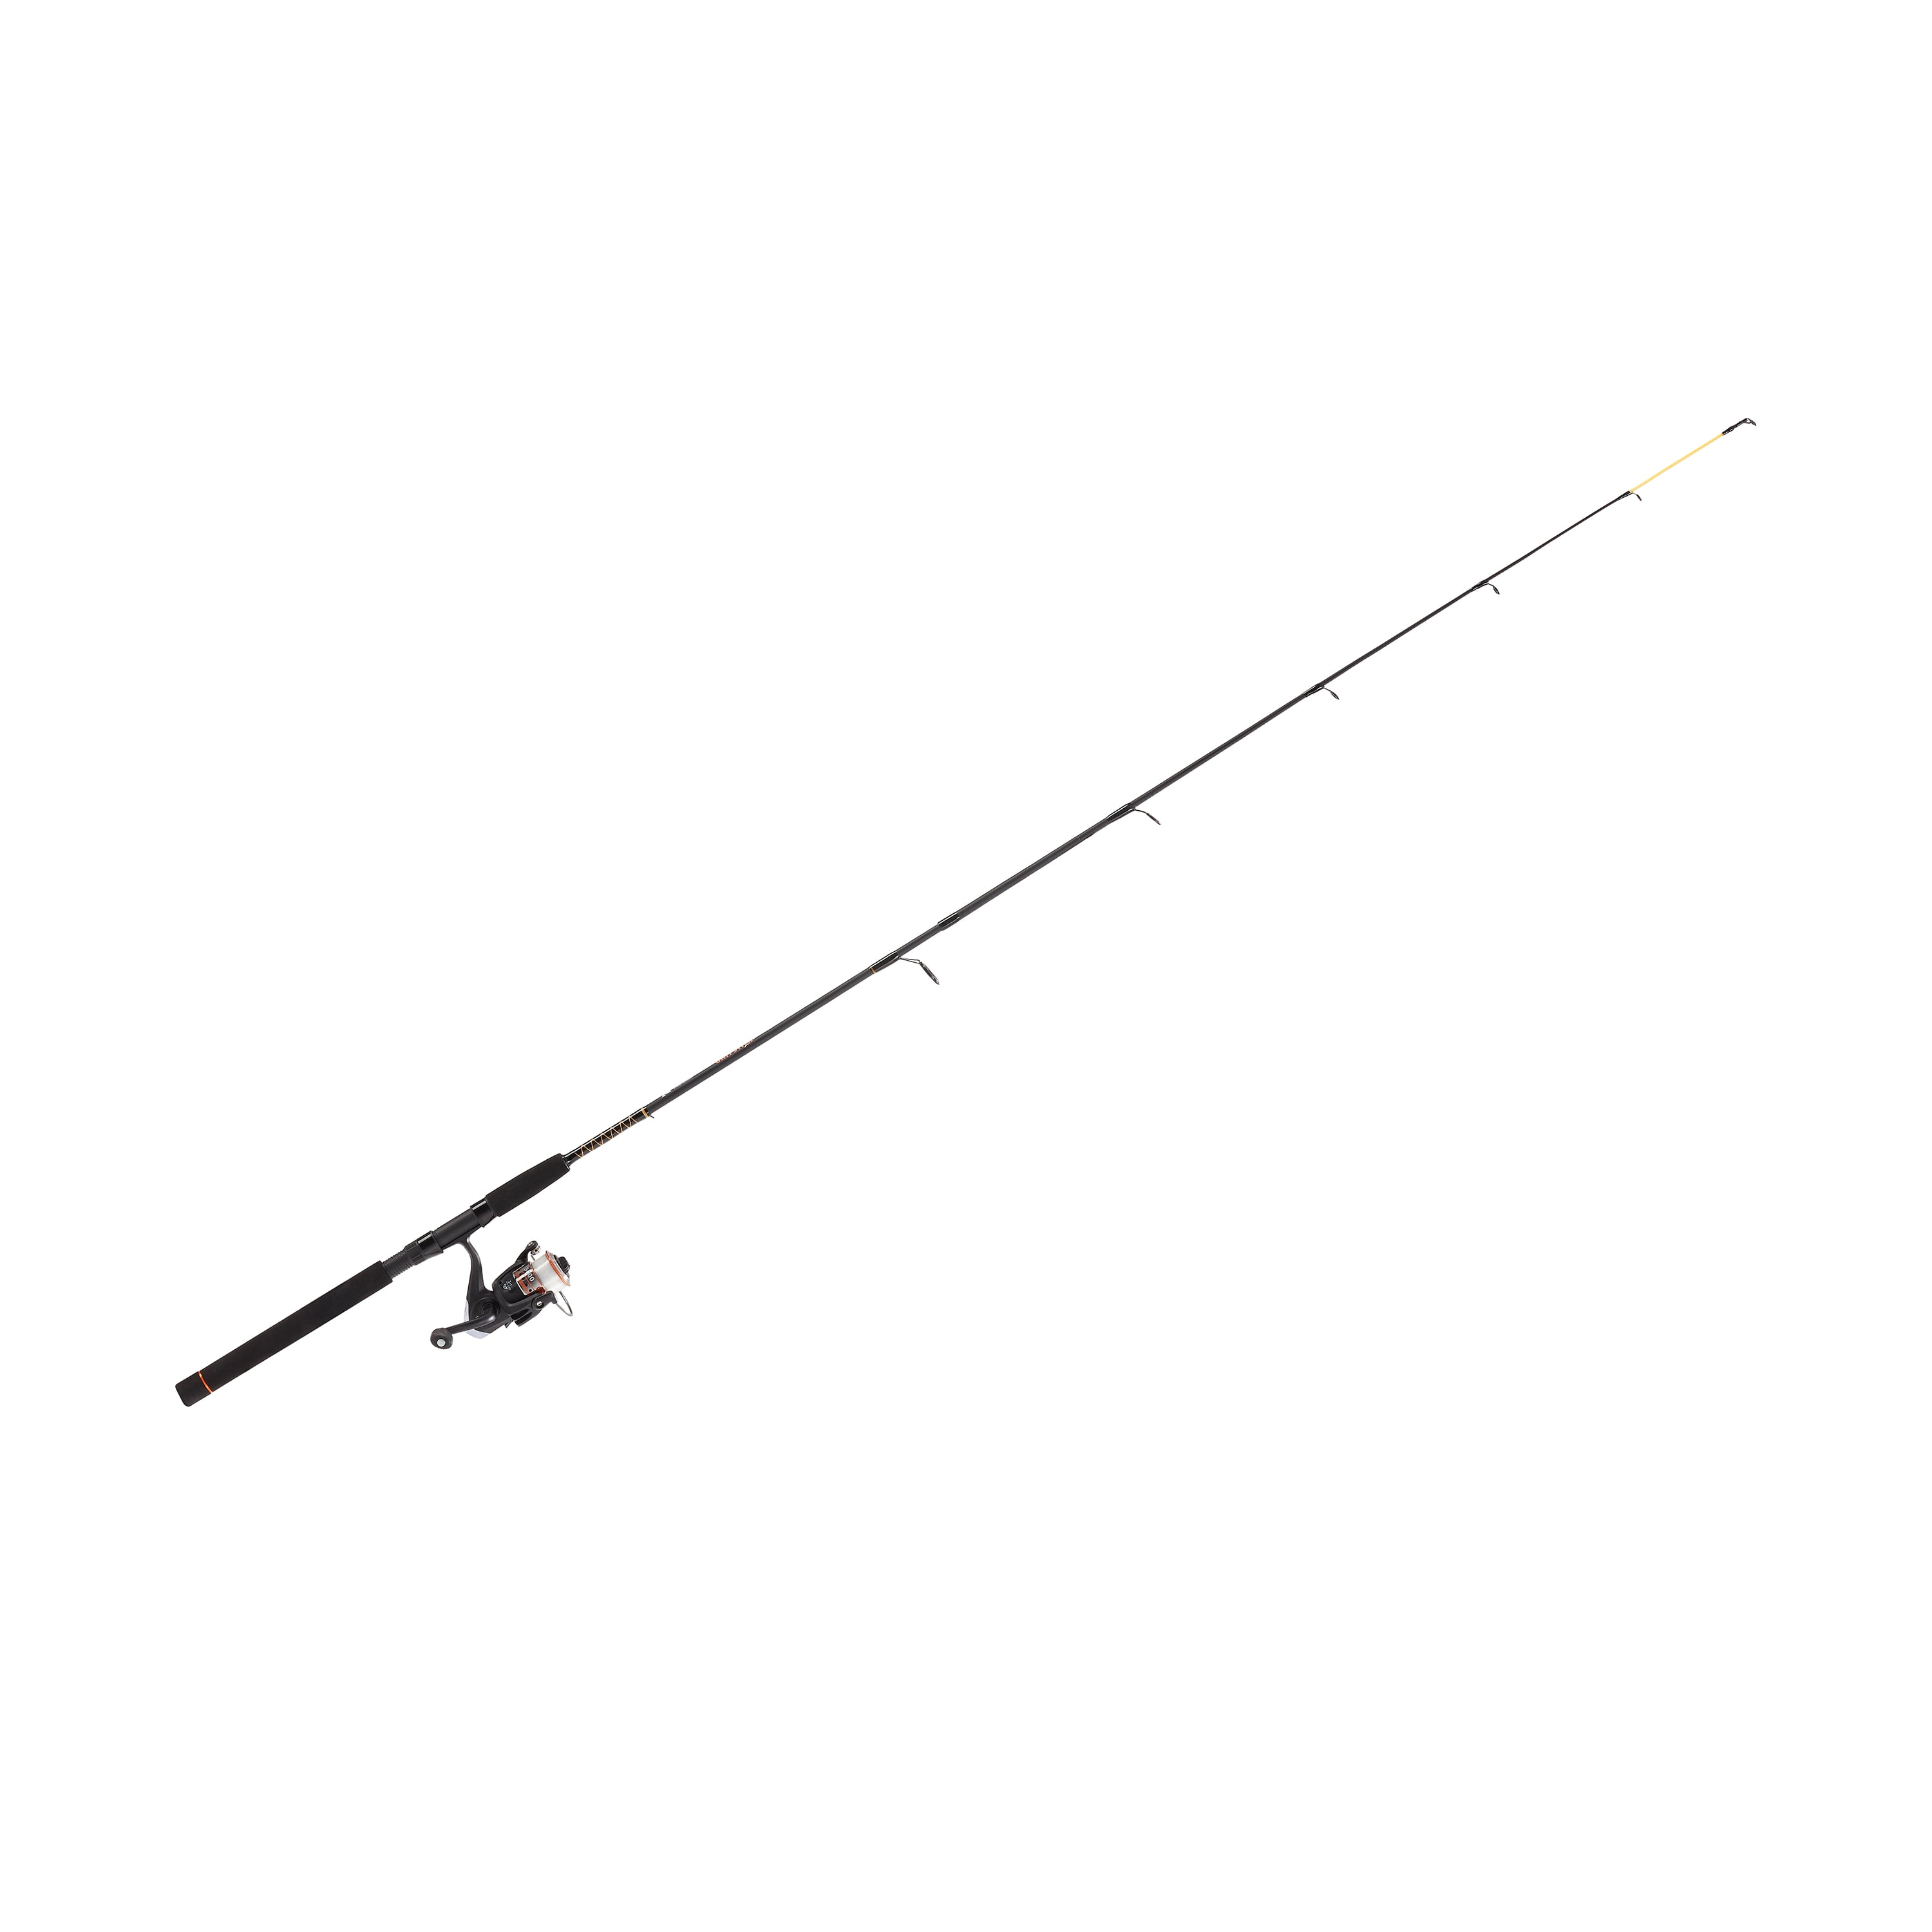 Ozark Trail Grit Stick Spinning Fishing Rod, Heavy Action, 7ft 